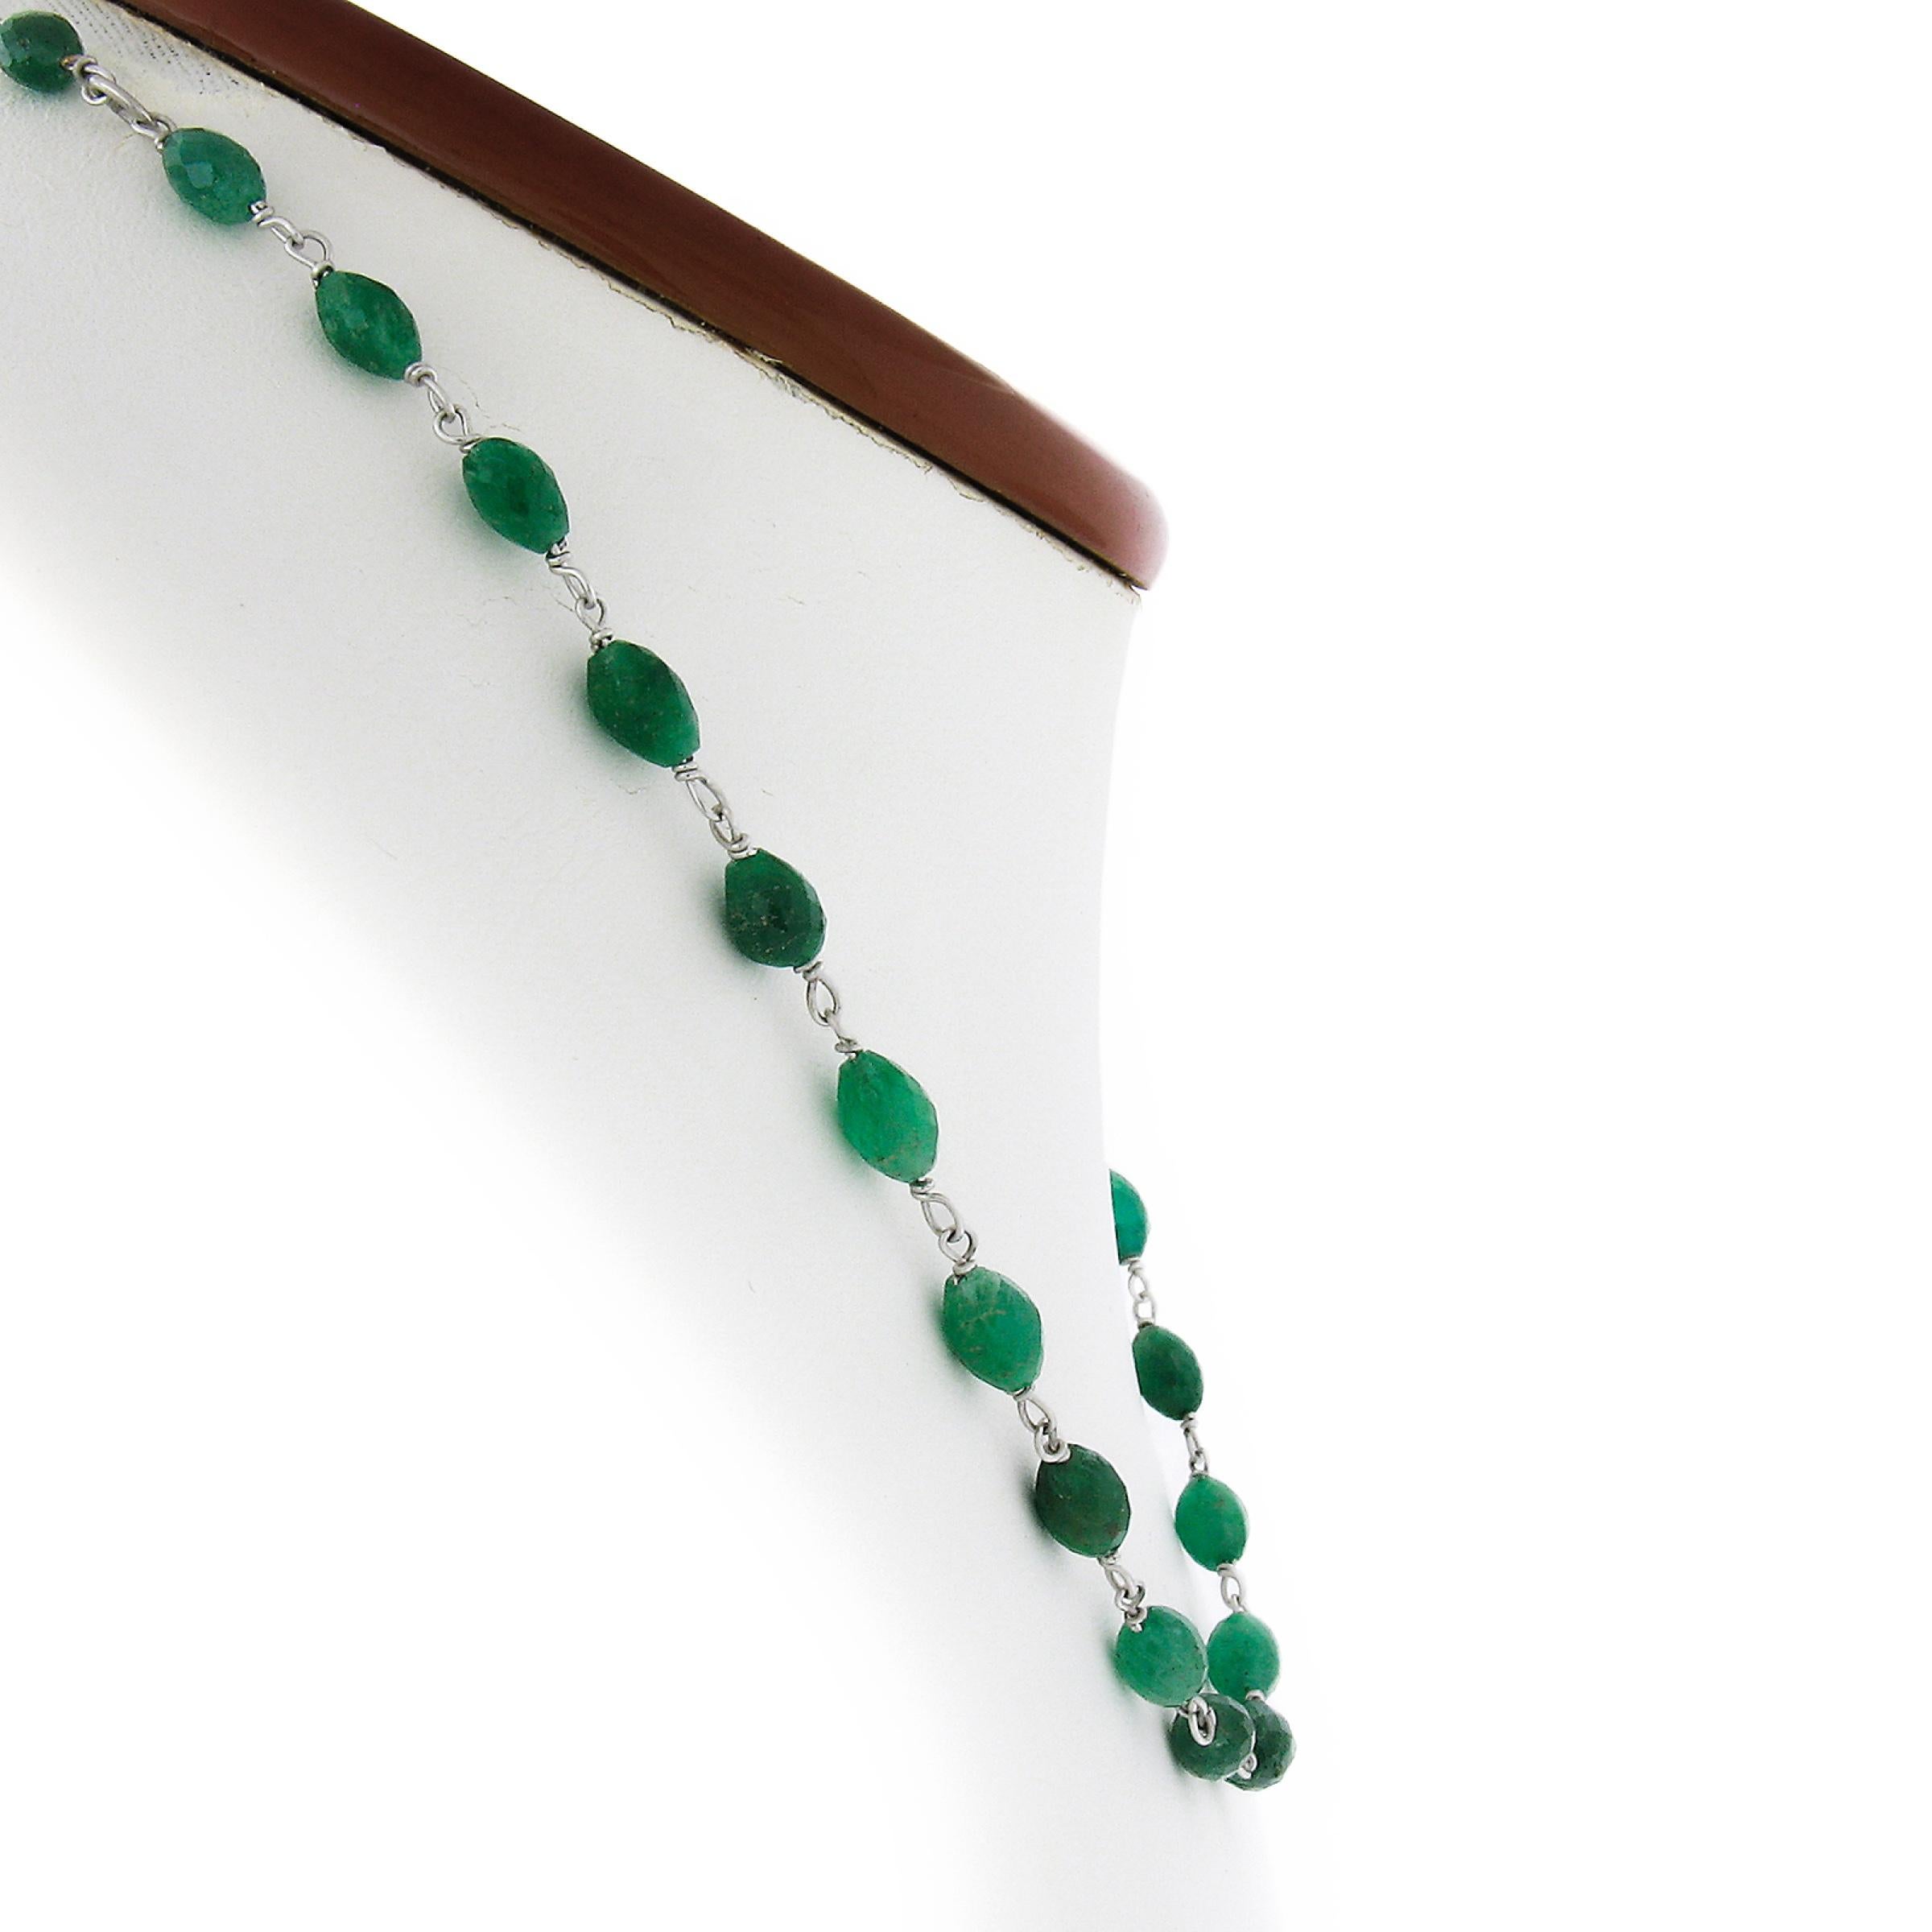 --Stone(s):--
(28) Natural Genuine Emeralds - Faceted Barrel Bead Shape - Strung -Green Color ** See Certification Details Below for Additional Info **

Material: Solid 18K White Gold Clasp w/ 14K White Gold Wire
Total Weight: 9.5 Grams
Length: 15.5